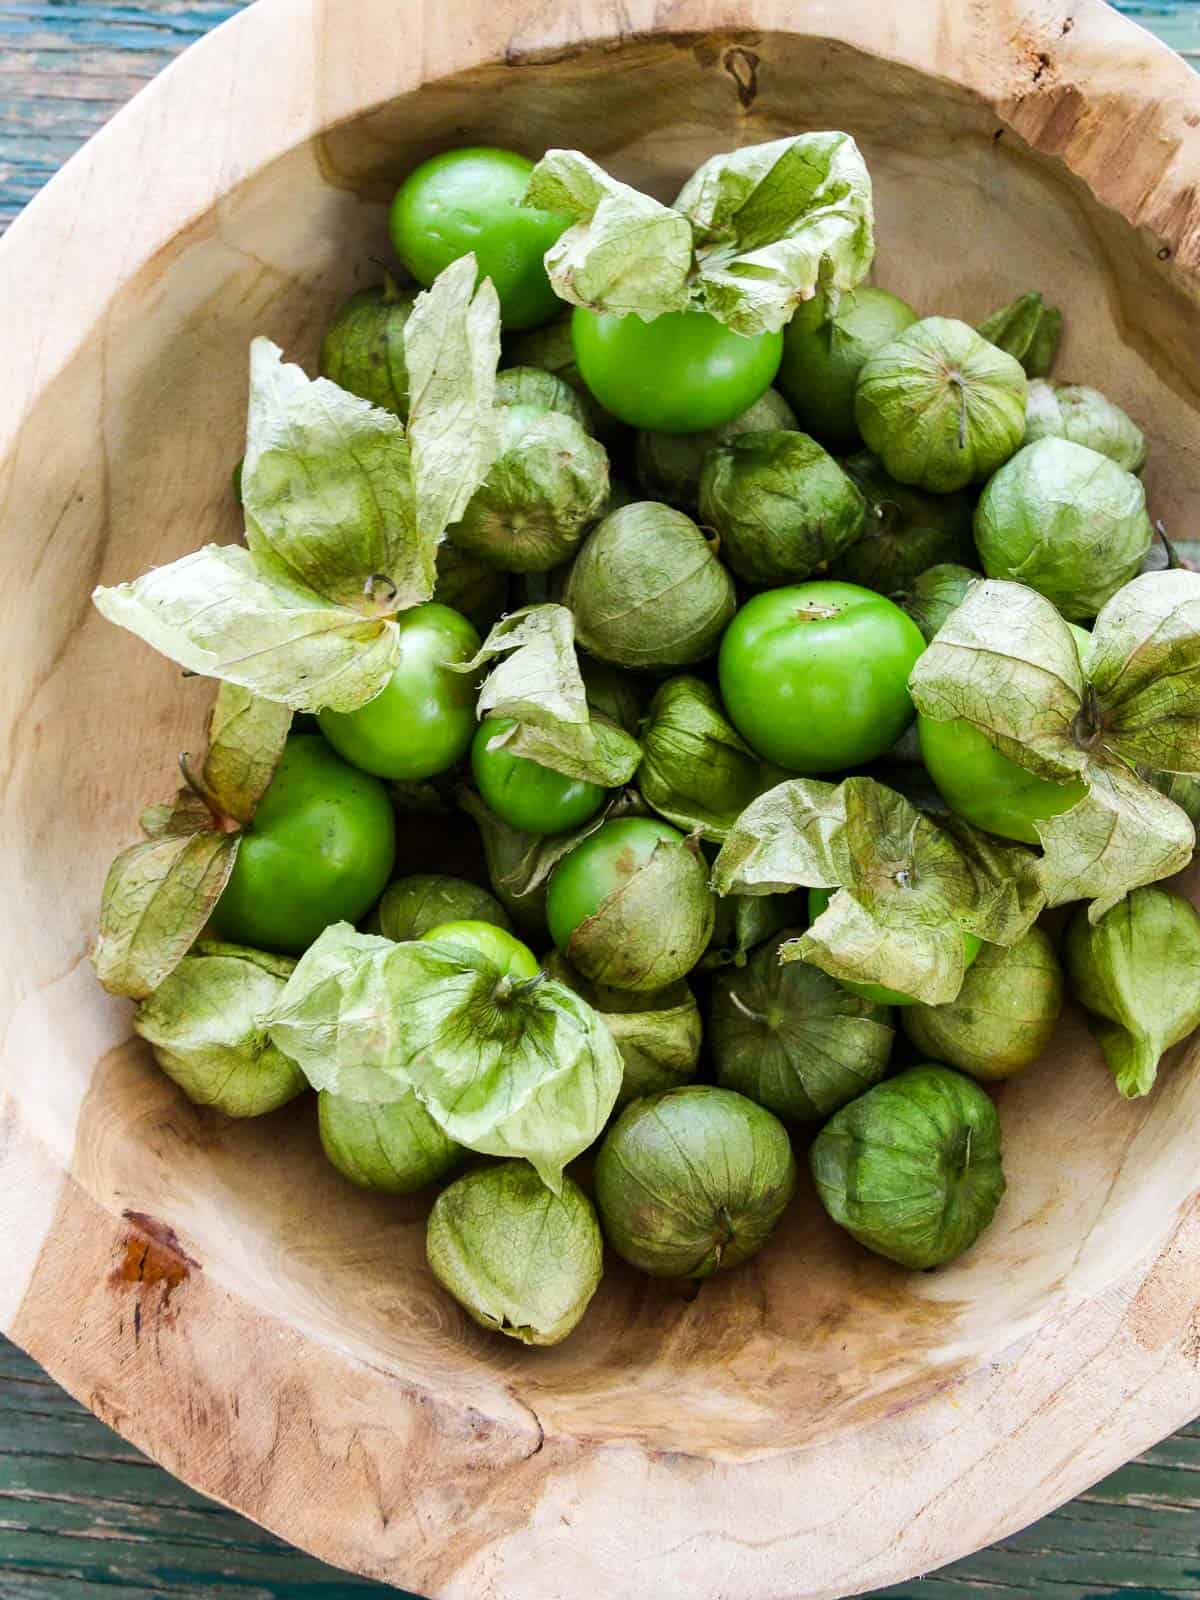 A wood bowl filled with ripe green tomatillos with their husks on.